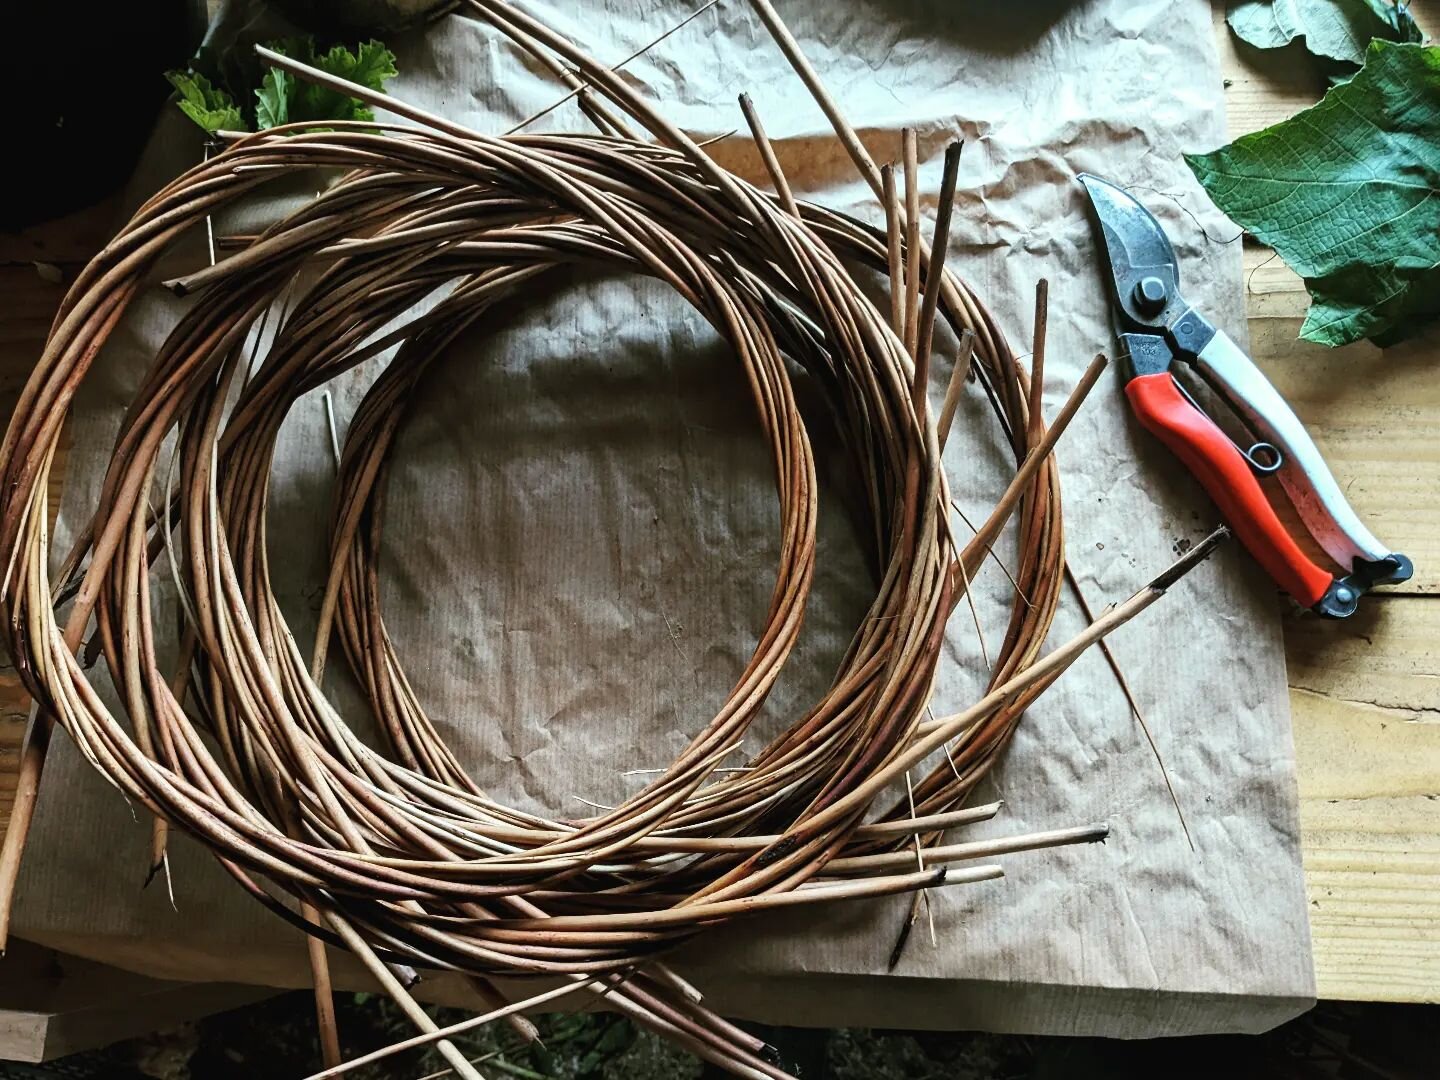 'Tis the season! At least, the season to prepare. Would anyone like to come and make wild and lustrous wreaths with me? We get to listen to folk music, drink whiskey and hang out in a neo-dark age barn. And wrest objects of beauty from vine and bloom